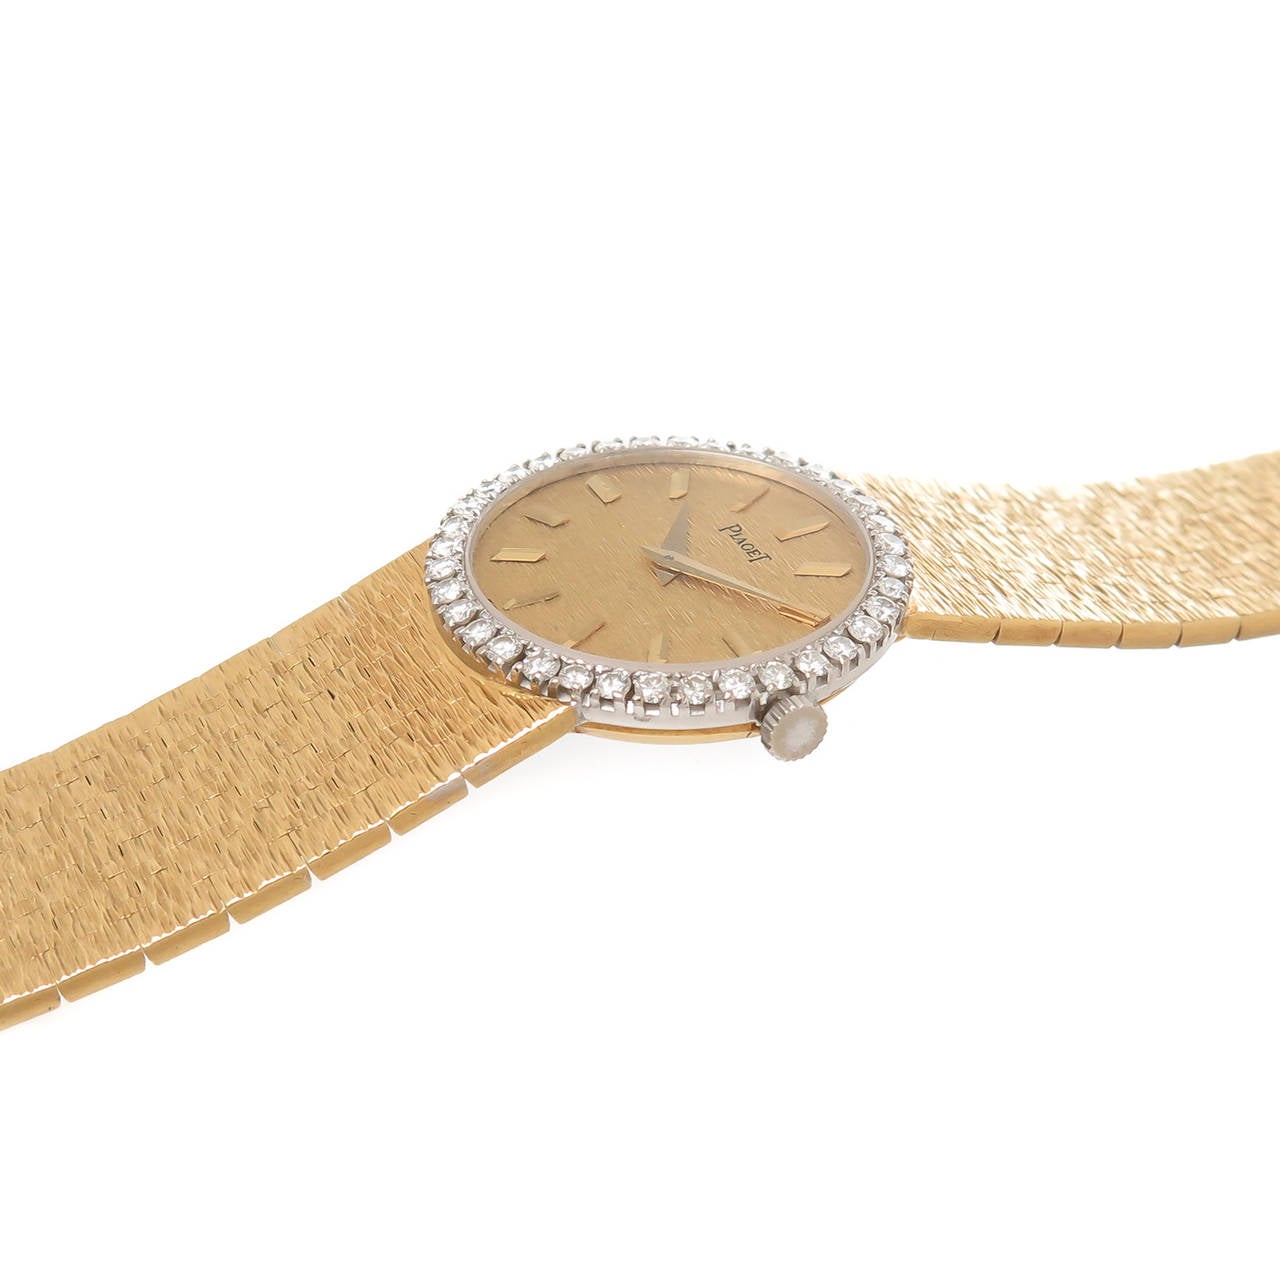 Rare Mint Condition With Original Box Circa 1970s Piaget 18K Yellow Gold and Diamond Ladies Bracelet Watch. The Round Watch Measuring 25 MM and attached to a 7 inch, fine mesh link Bracelet that measures 5/8 inch wide. The White Gold Bezel is set